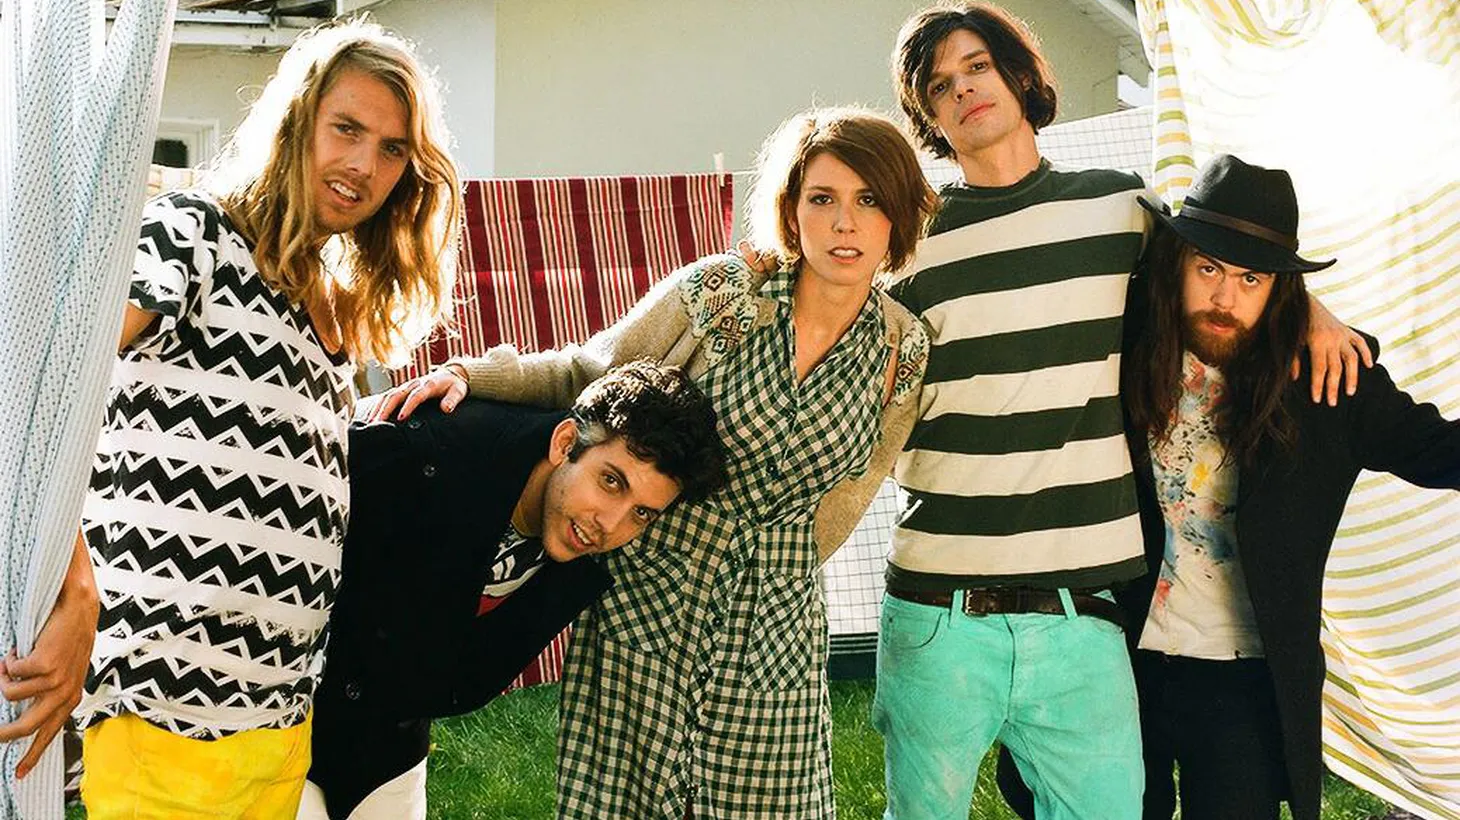 The five globe-trotting members of Grouplove met on the isle of Crete and had so much fun making music together that they pooled their funds and recorded their debut here in Los Angeles. Lucky for us, they'll reconvene to perform their songs live on Morning Becomes Eclectic when they join us at 11:15am.